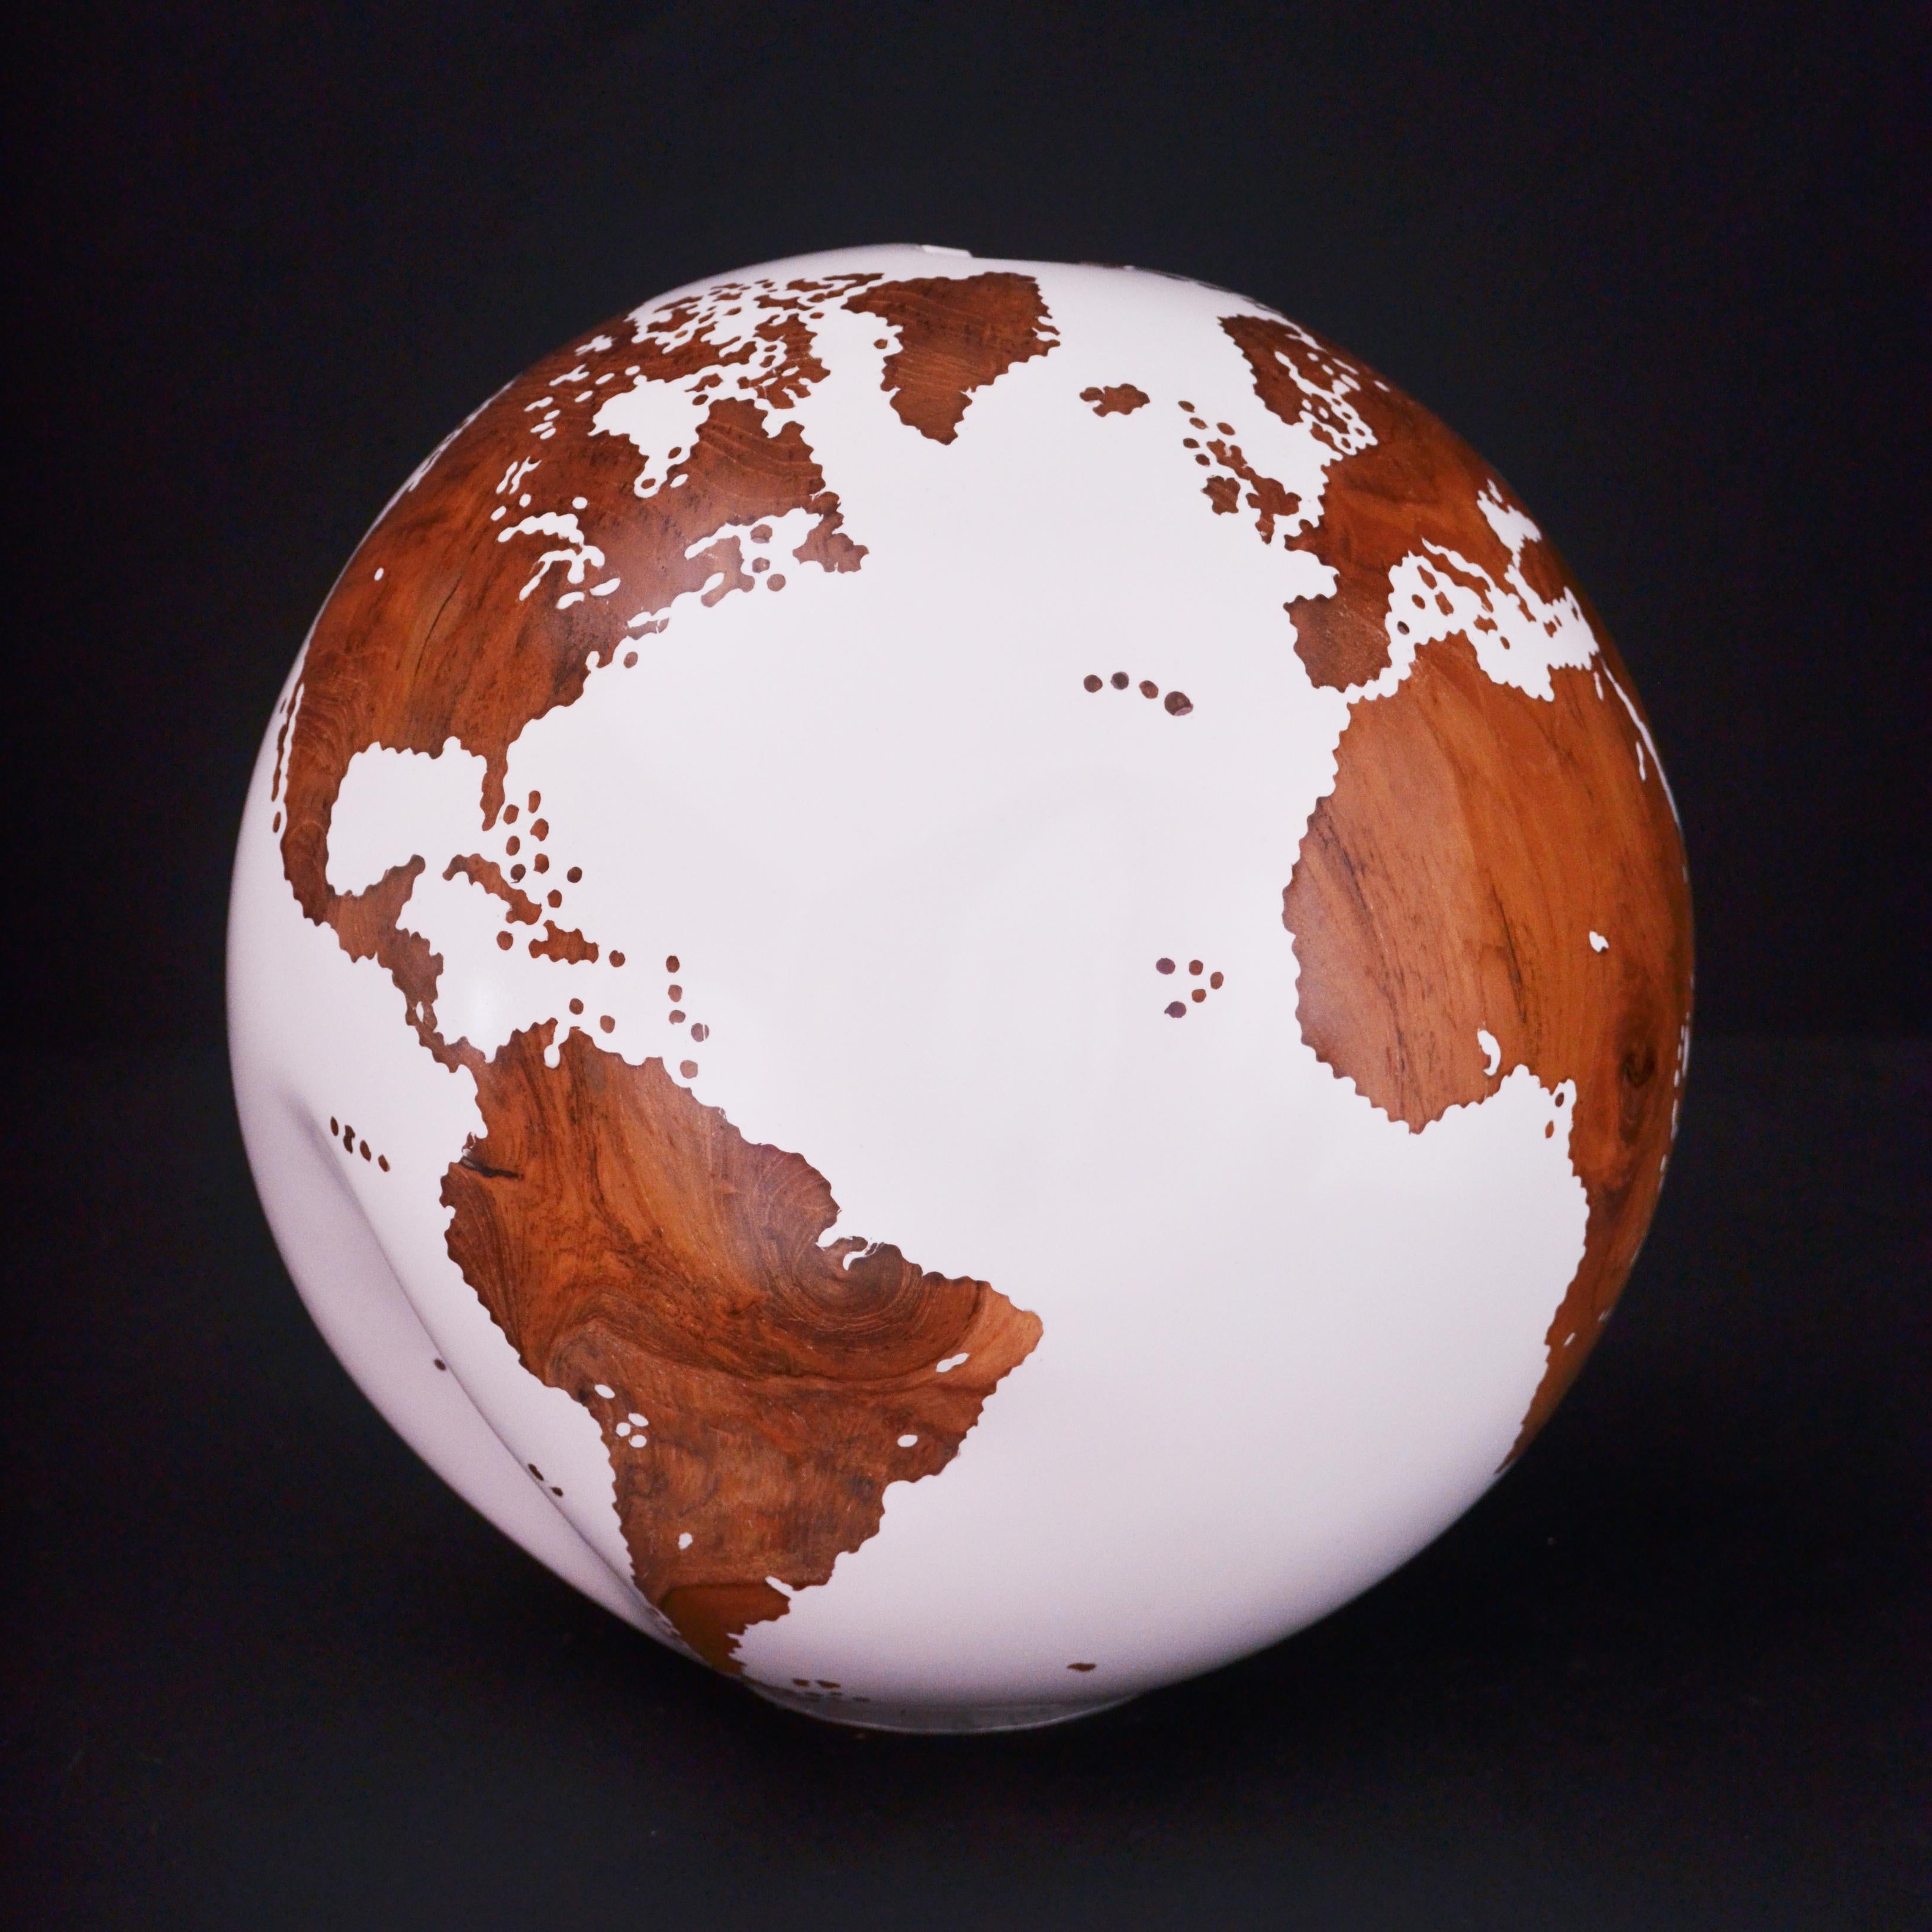 Teakwood and white make this beautiful turning globe a real stunning sculpture.
Made from a whole piece of wood the way the sculpture is shaped is defined by how the tree grew.
Sitting on a turning base the sculpture can spin silently around, so